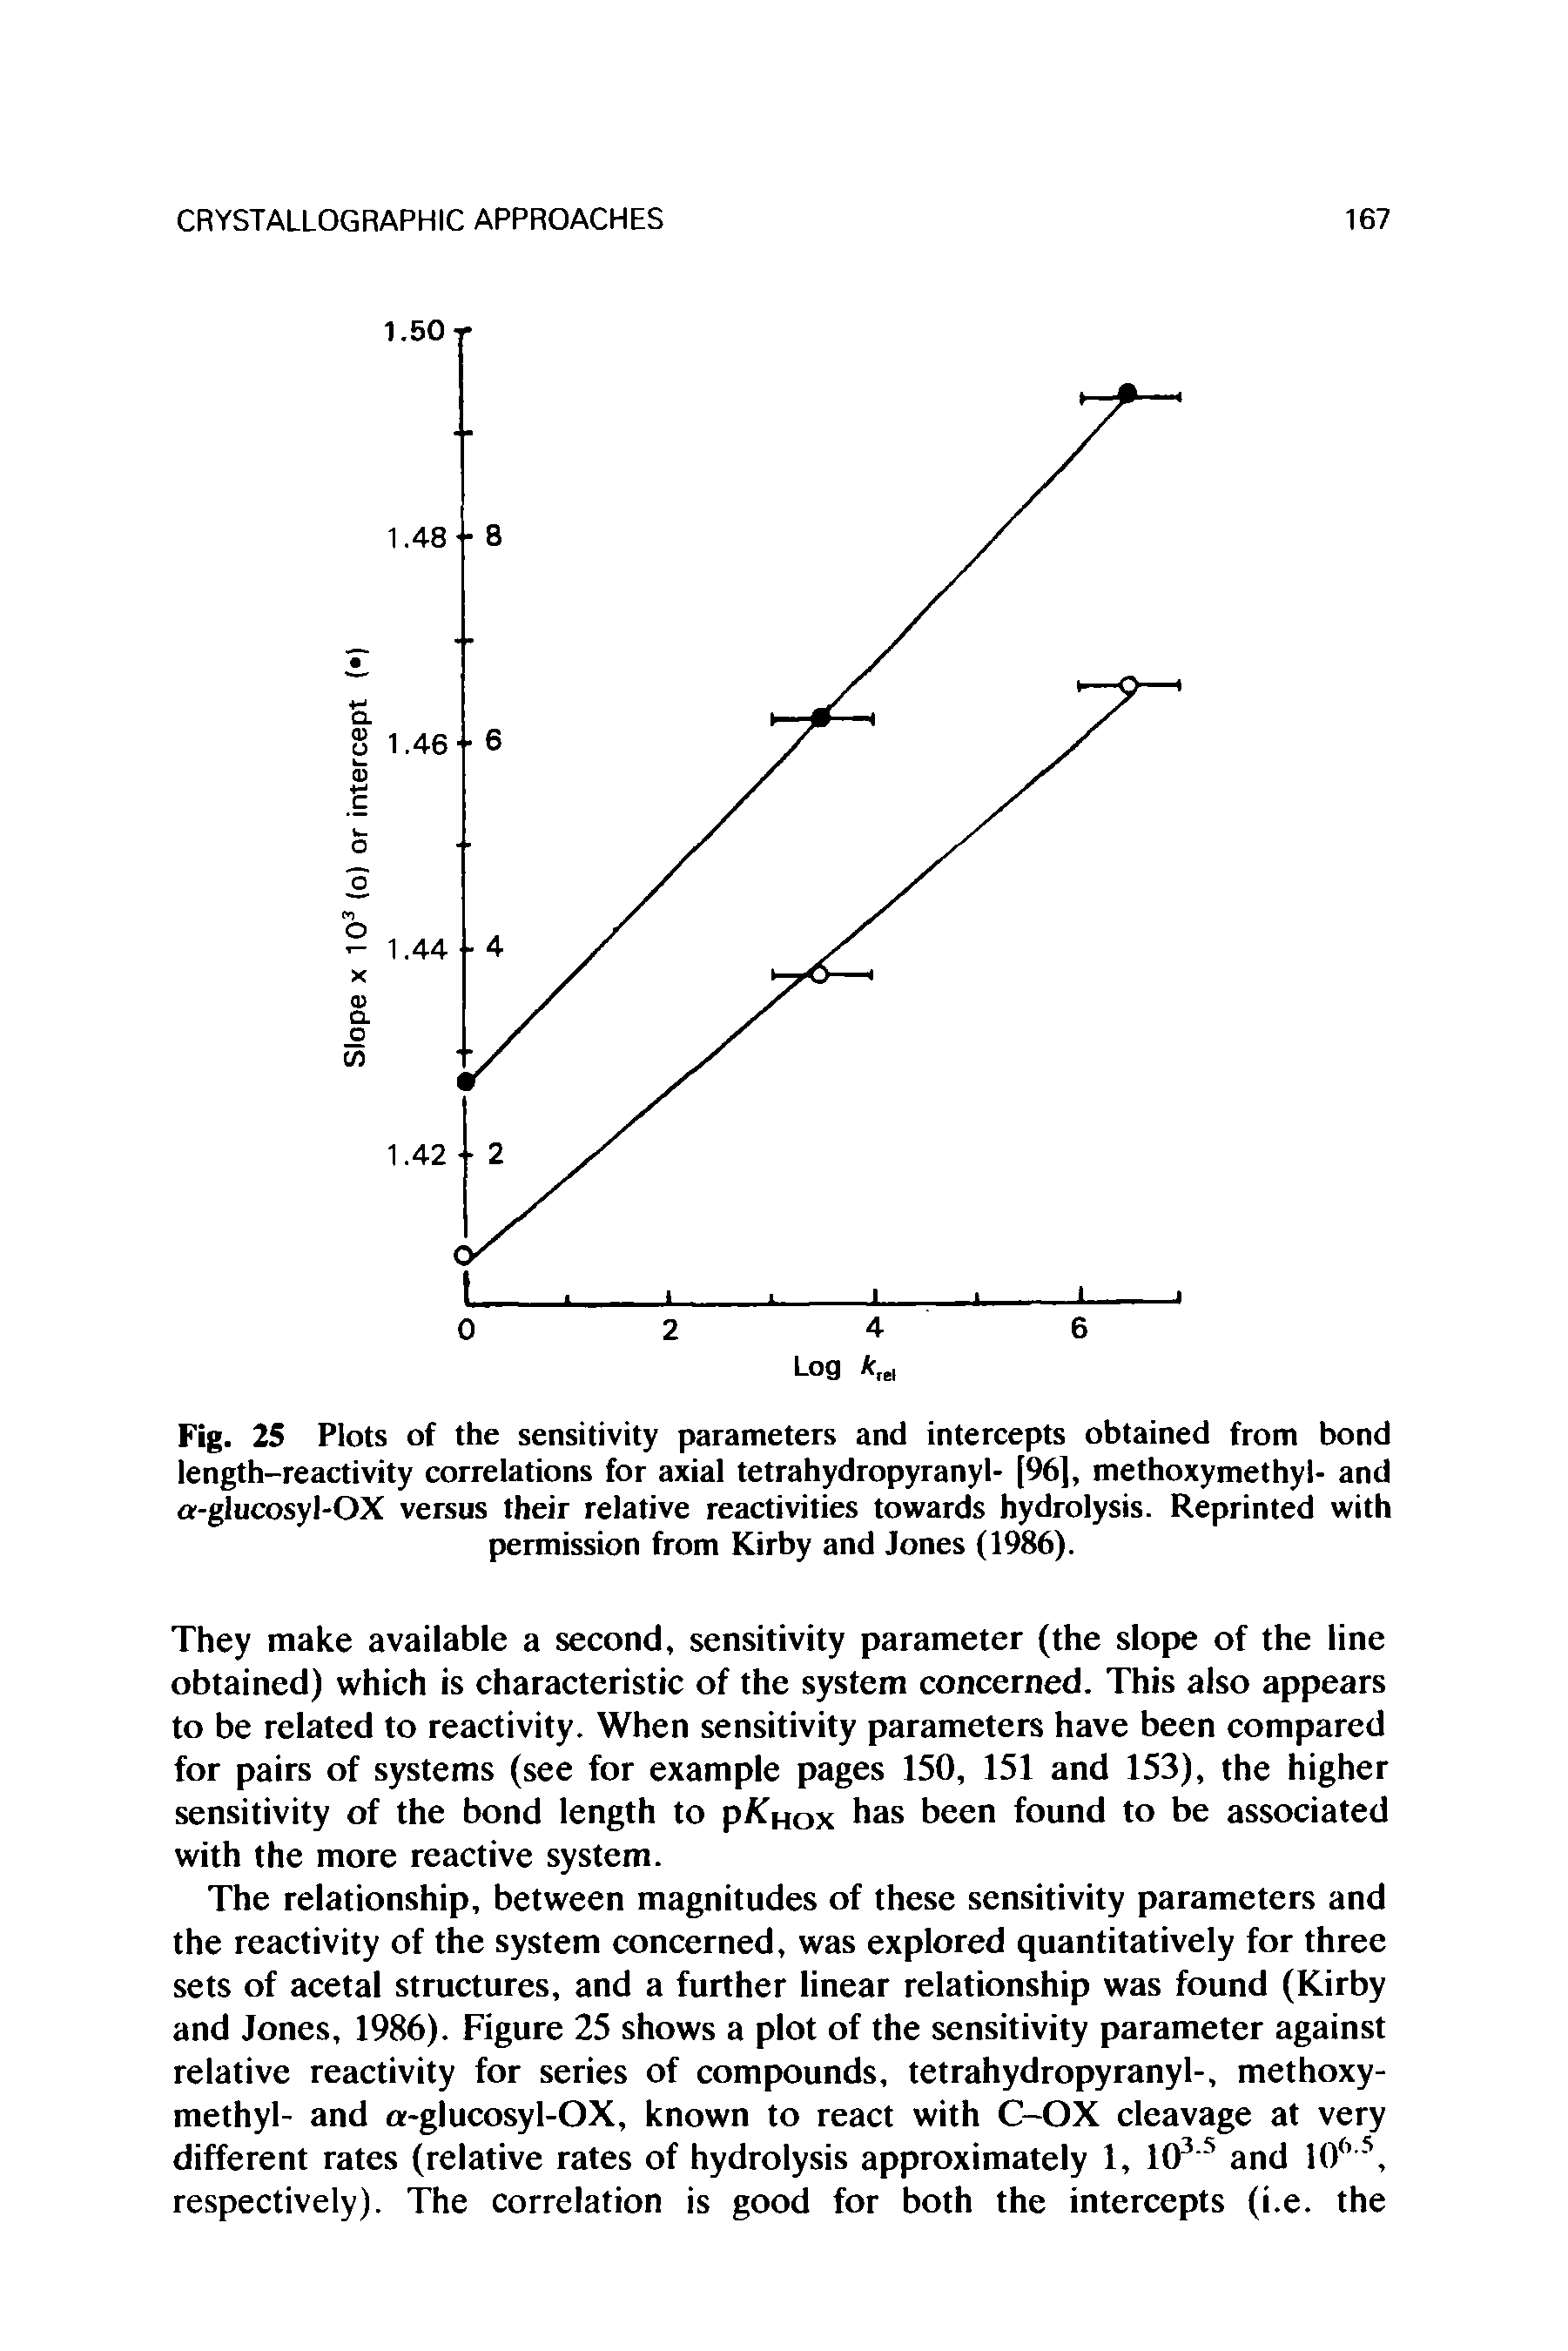 Fig. 25 Plots of the sensitivity parameters and intercepts obtained from bond length-reactivity correlations for axial tetrahydropyranyl- [96], methoxymethyl- and a-glucosyl-OX versus their relative reactivities towards hydrolysis. Reprinted with permission from Kirby and Jones (1986).